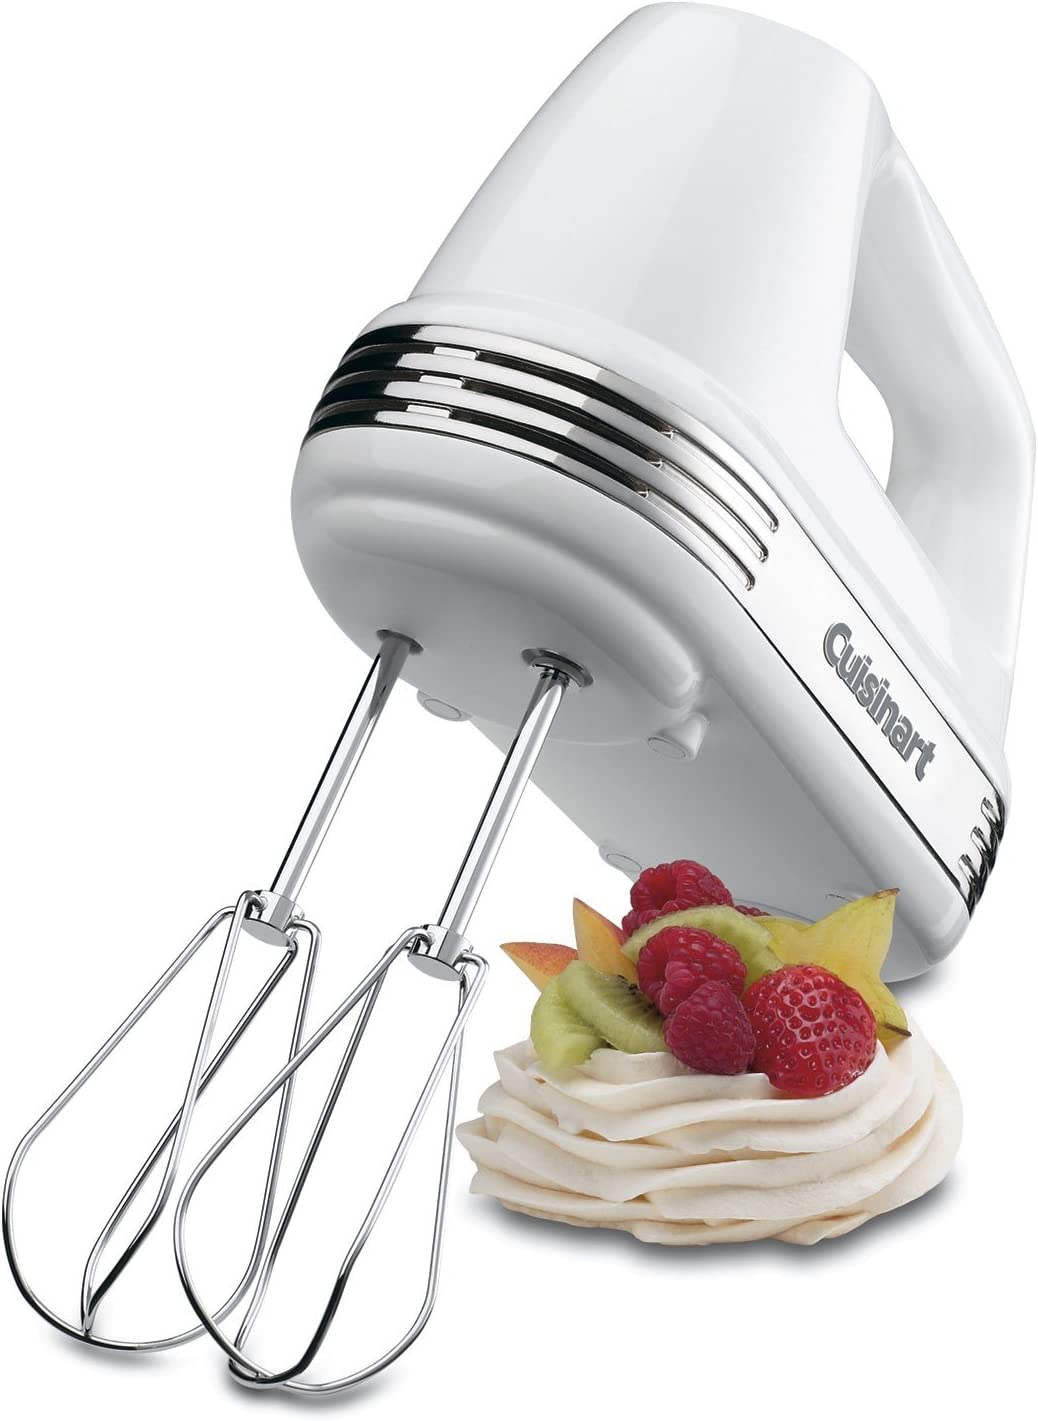 Cuisinart HM-70FR 7 Speed Hand Mixer, White - Certified Refurbished